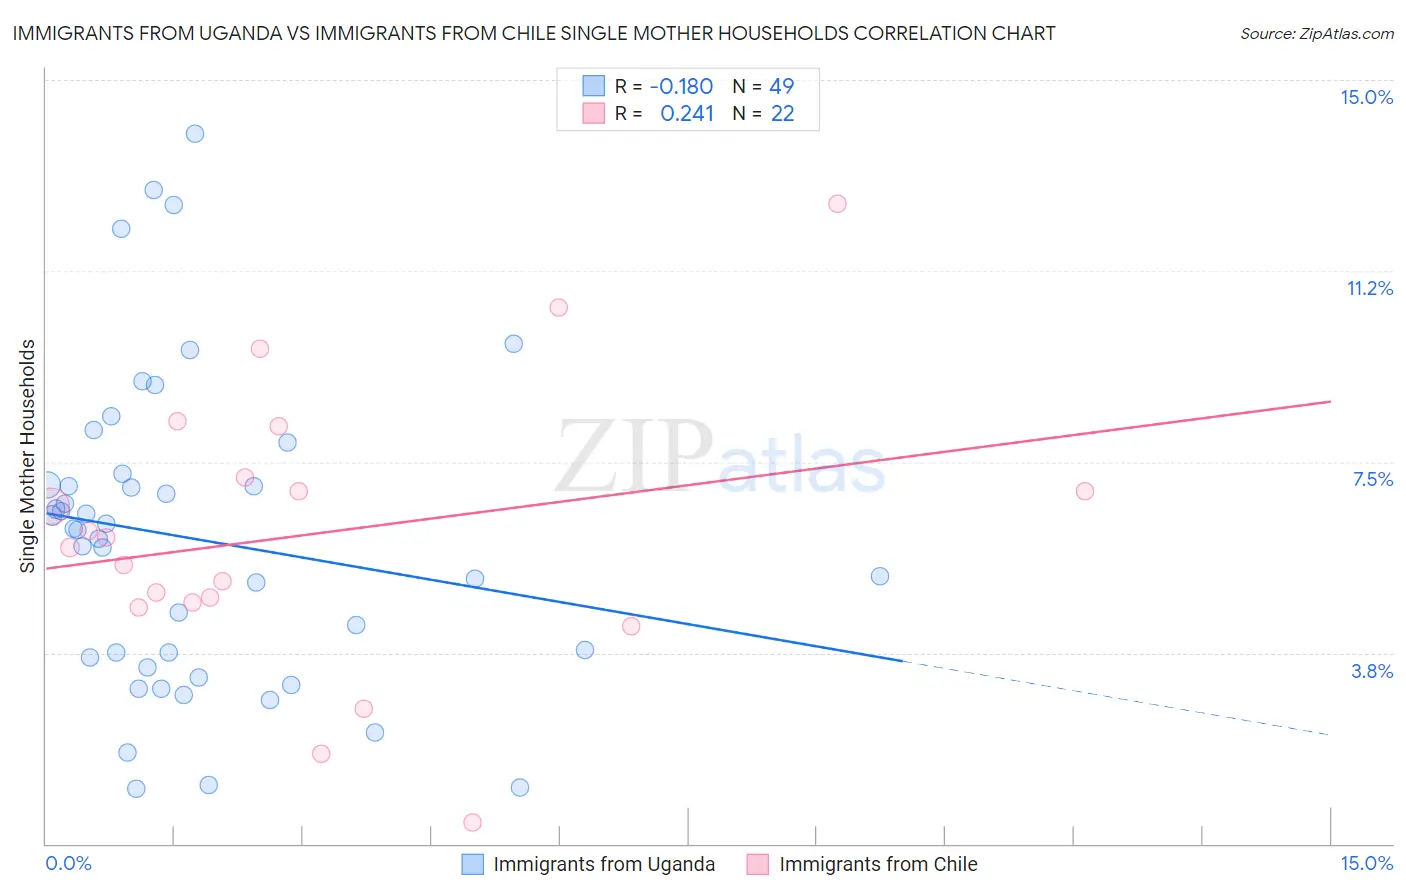 Immigrants from Uganda vs Immigrants from Chile Single Mother Households